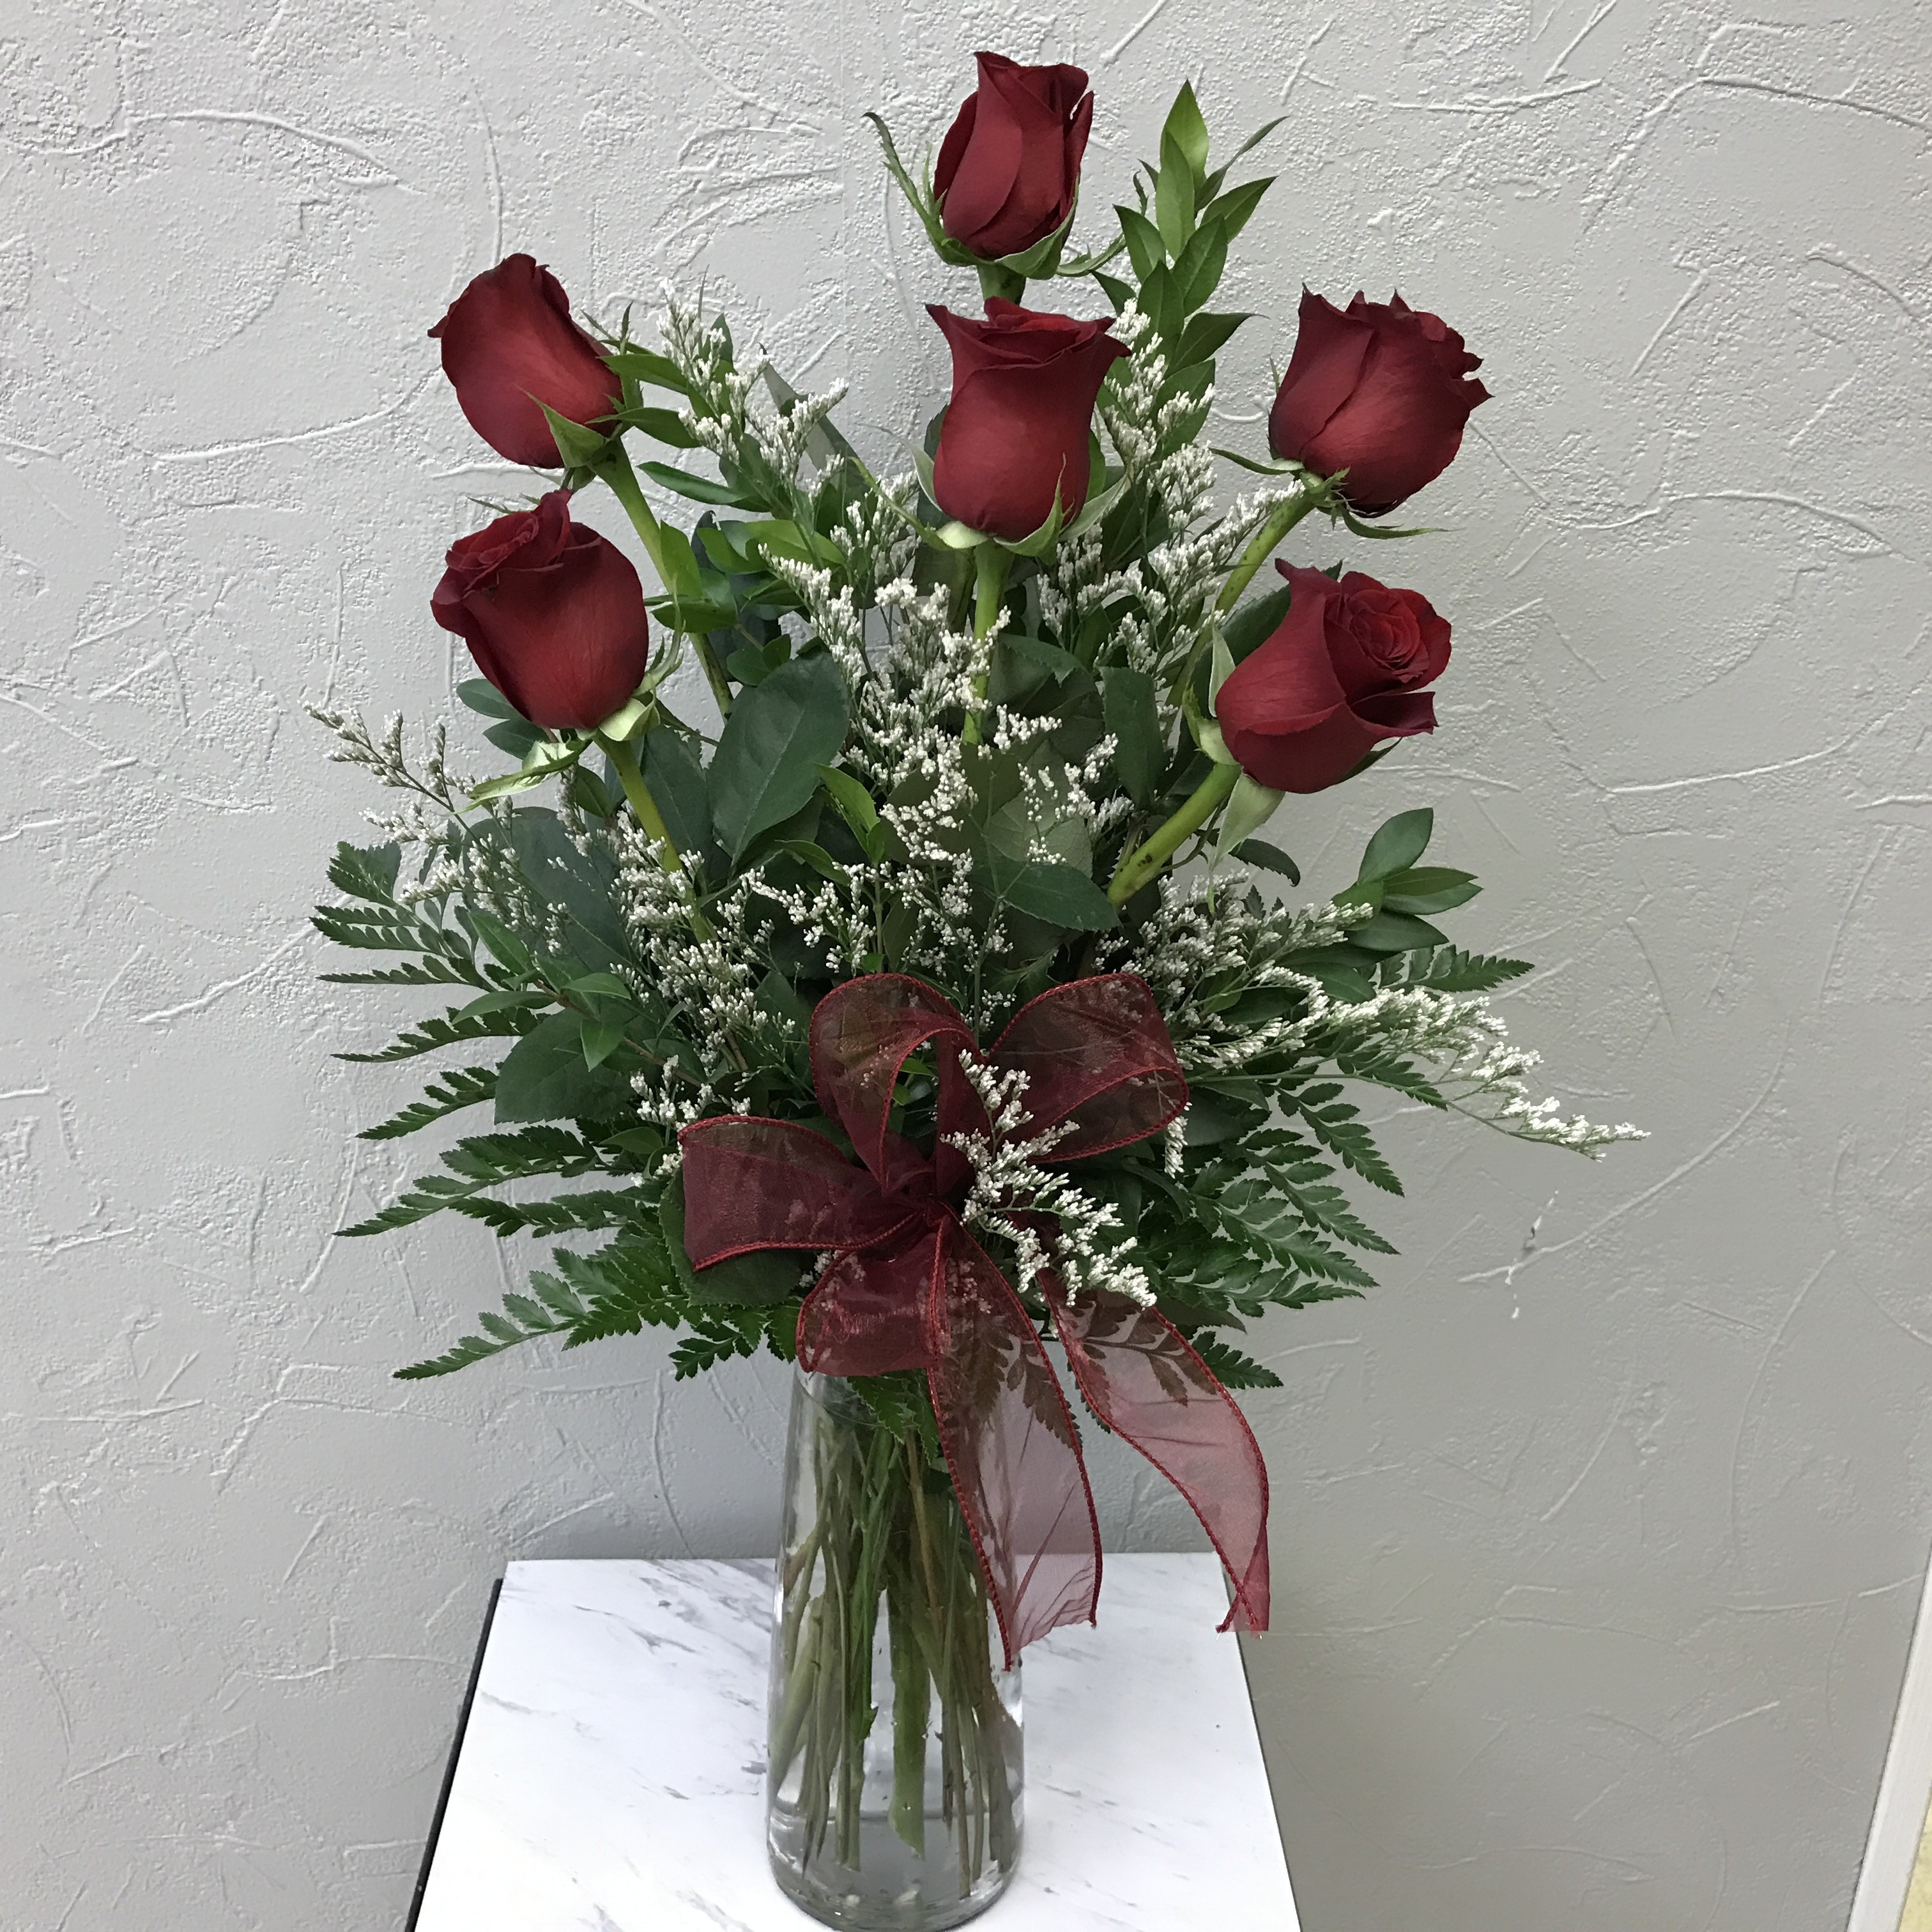 Gorham Tulip Bouquet Vase Of Love and Romance Flowers Delivery Peoria Prospect Florist Intended for 6 Red Roses